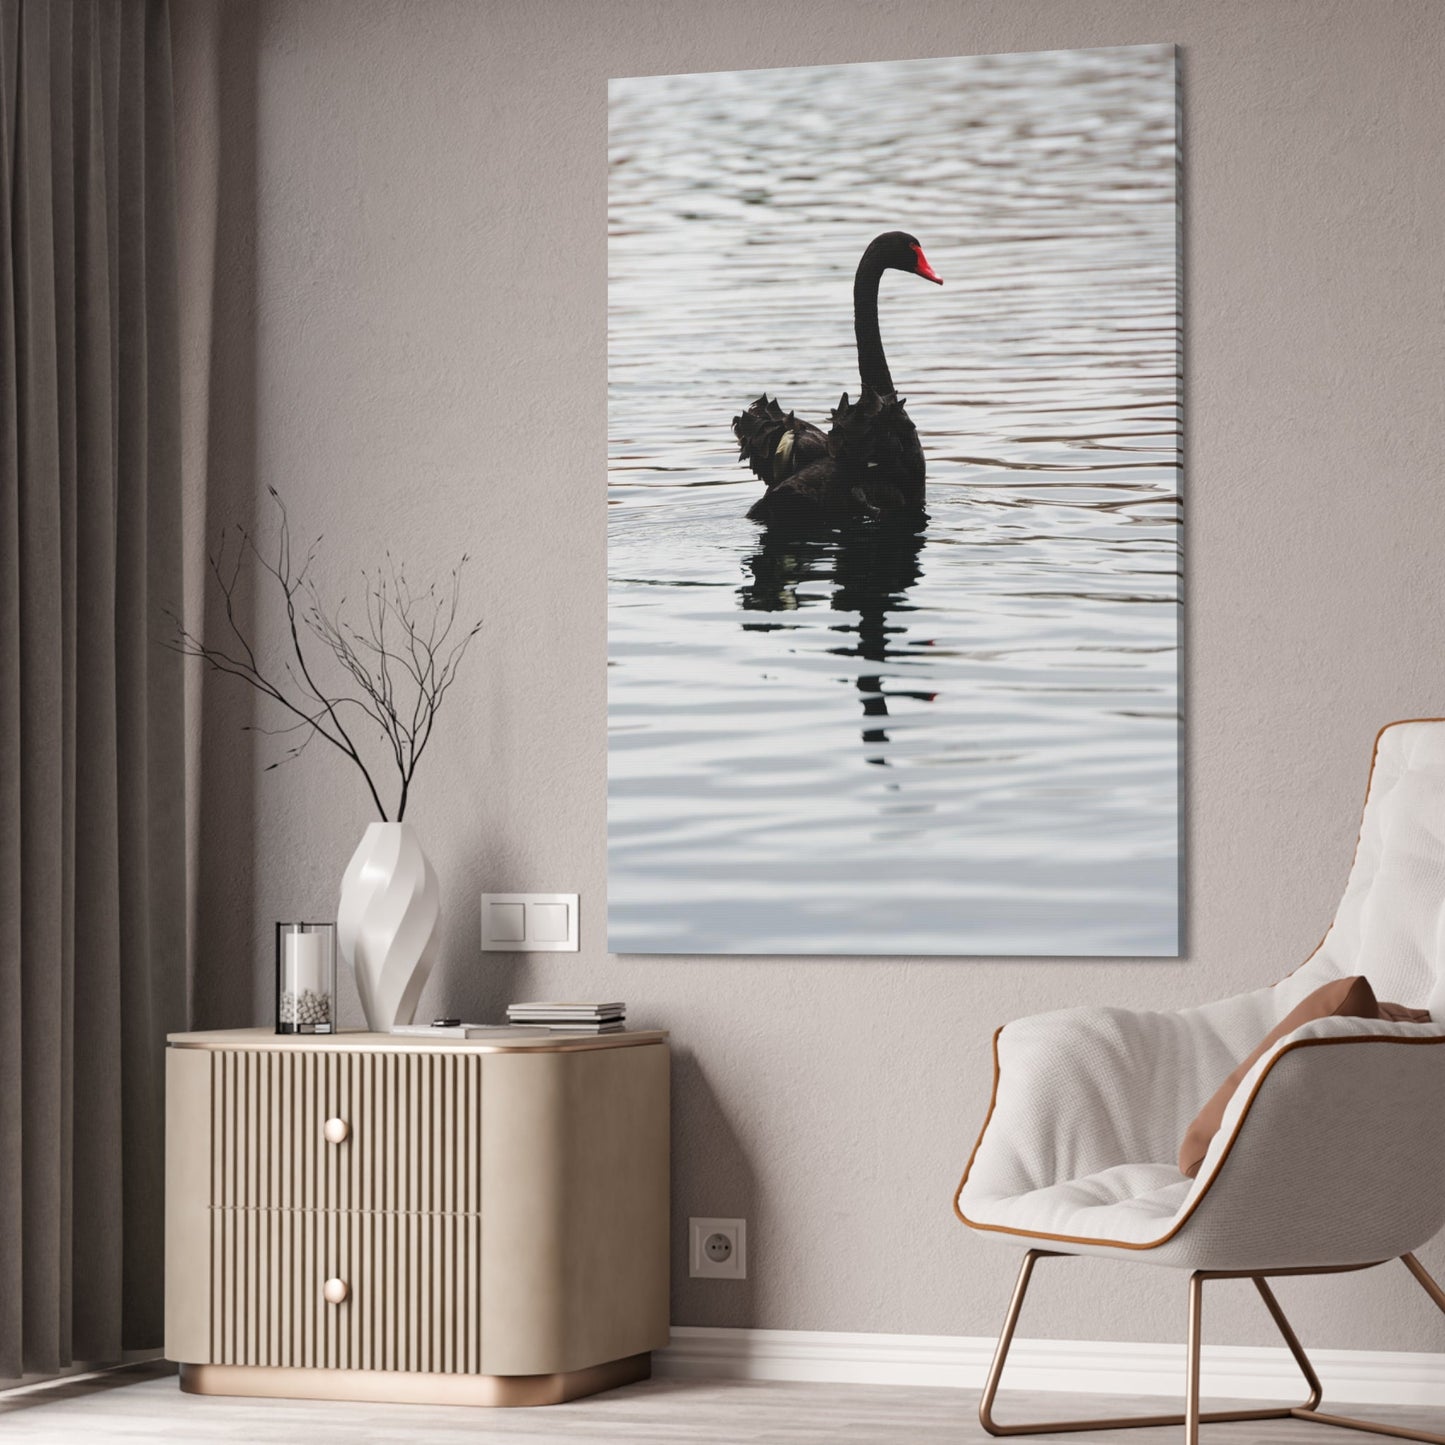 Elegance and Serenity: Poster and Canvas Art Celebrating the Poise and Calmness of Swan